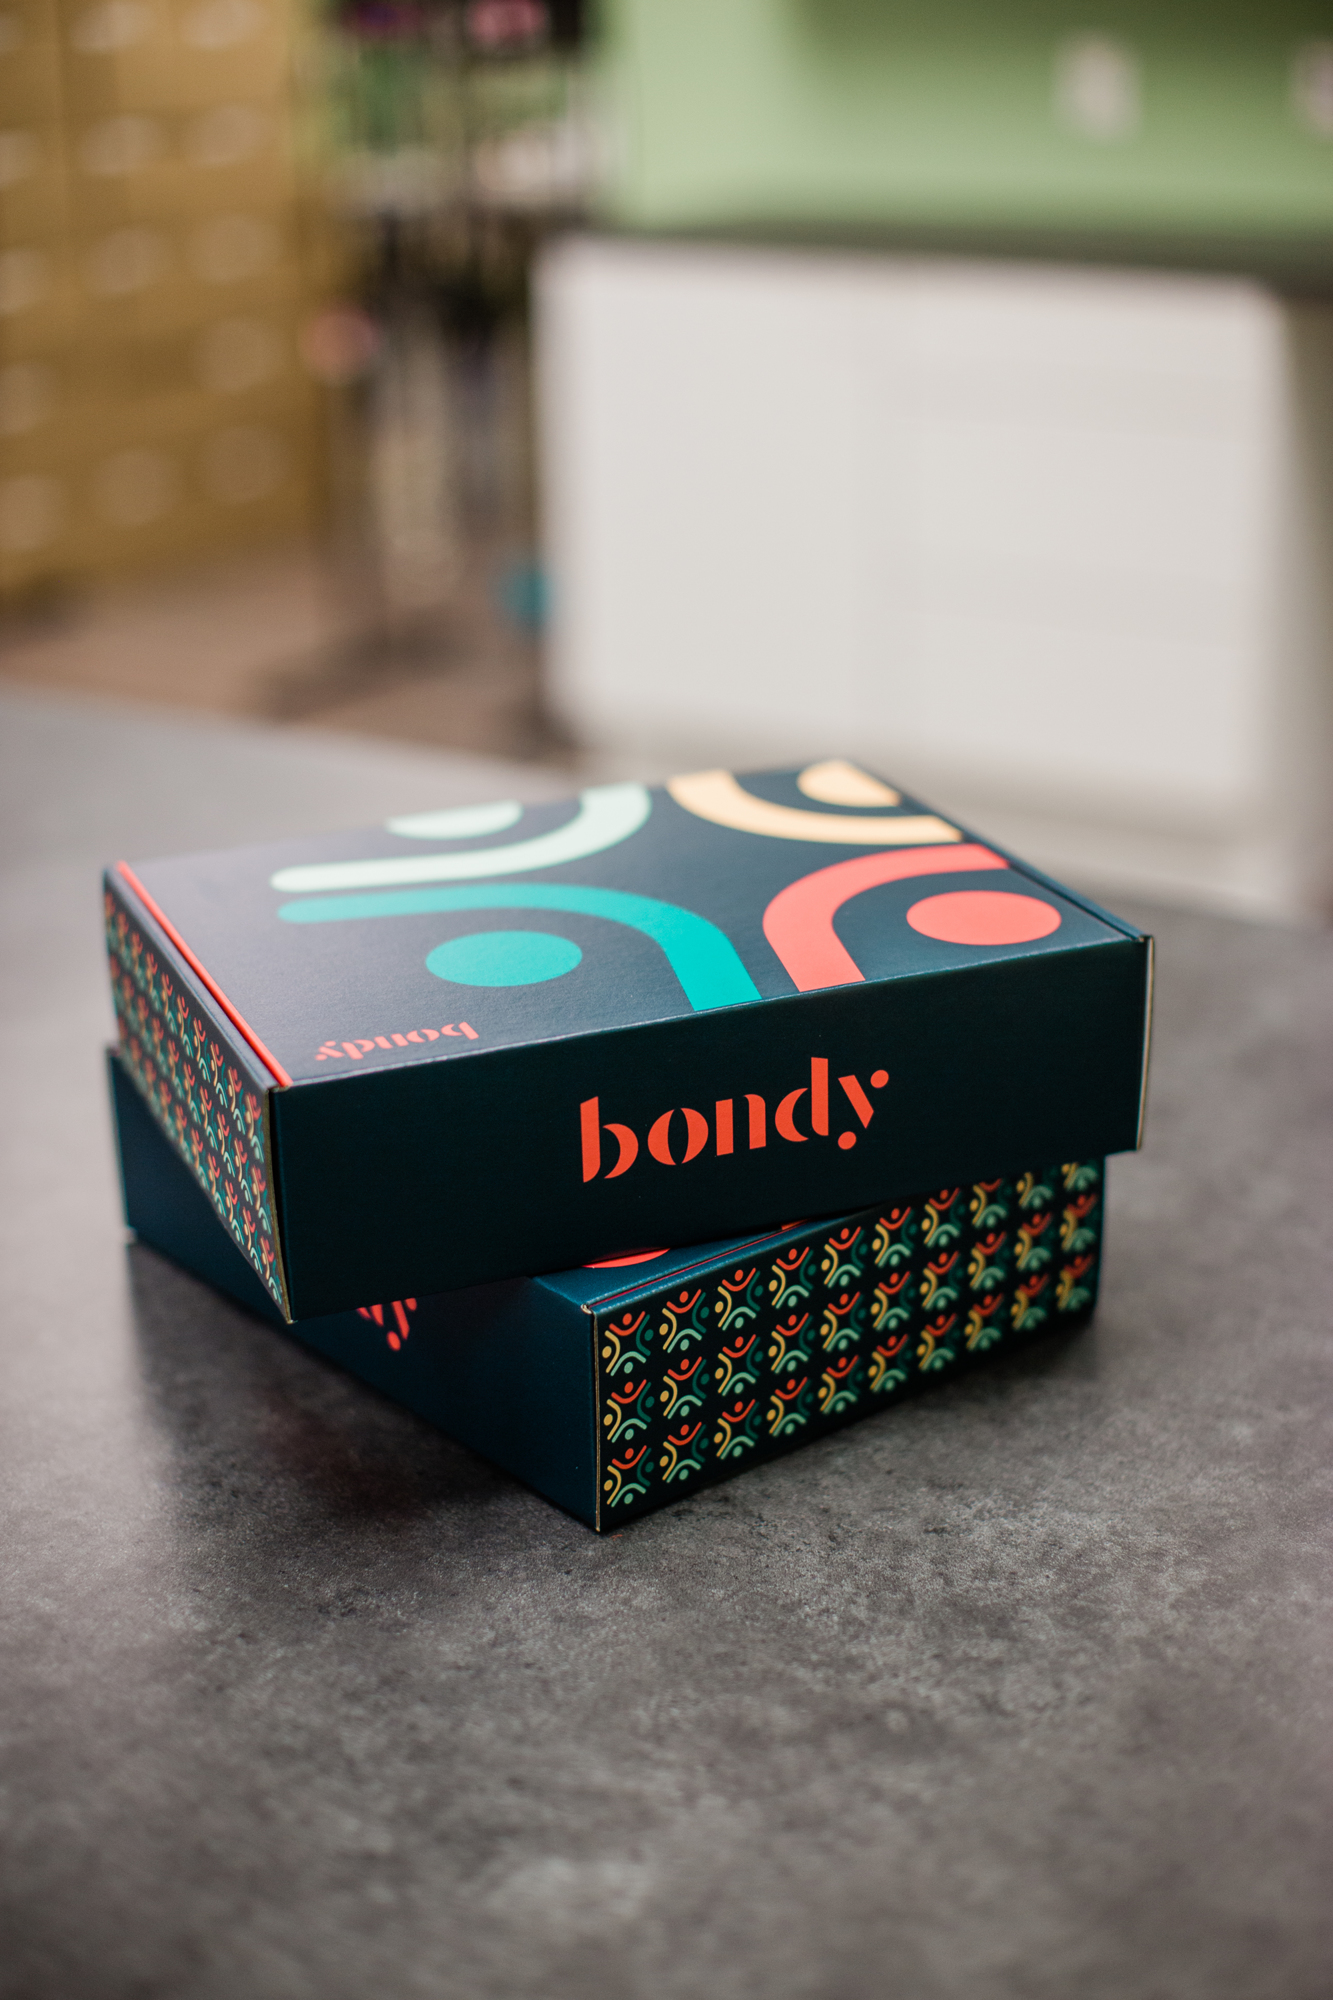  Bondy boxes are based on themes, from motivation to recognition to celebration, with items inside that appeal to the five senses.